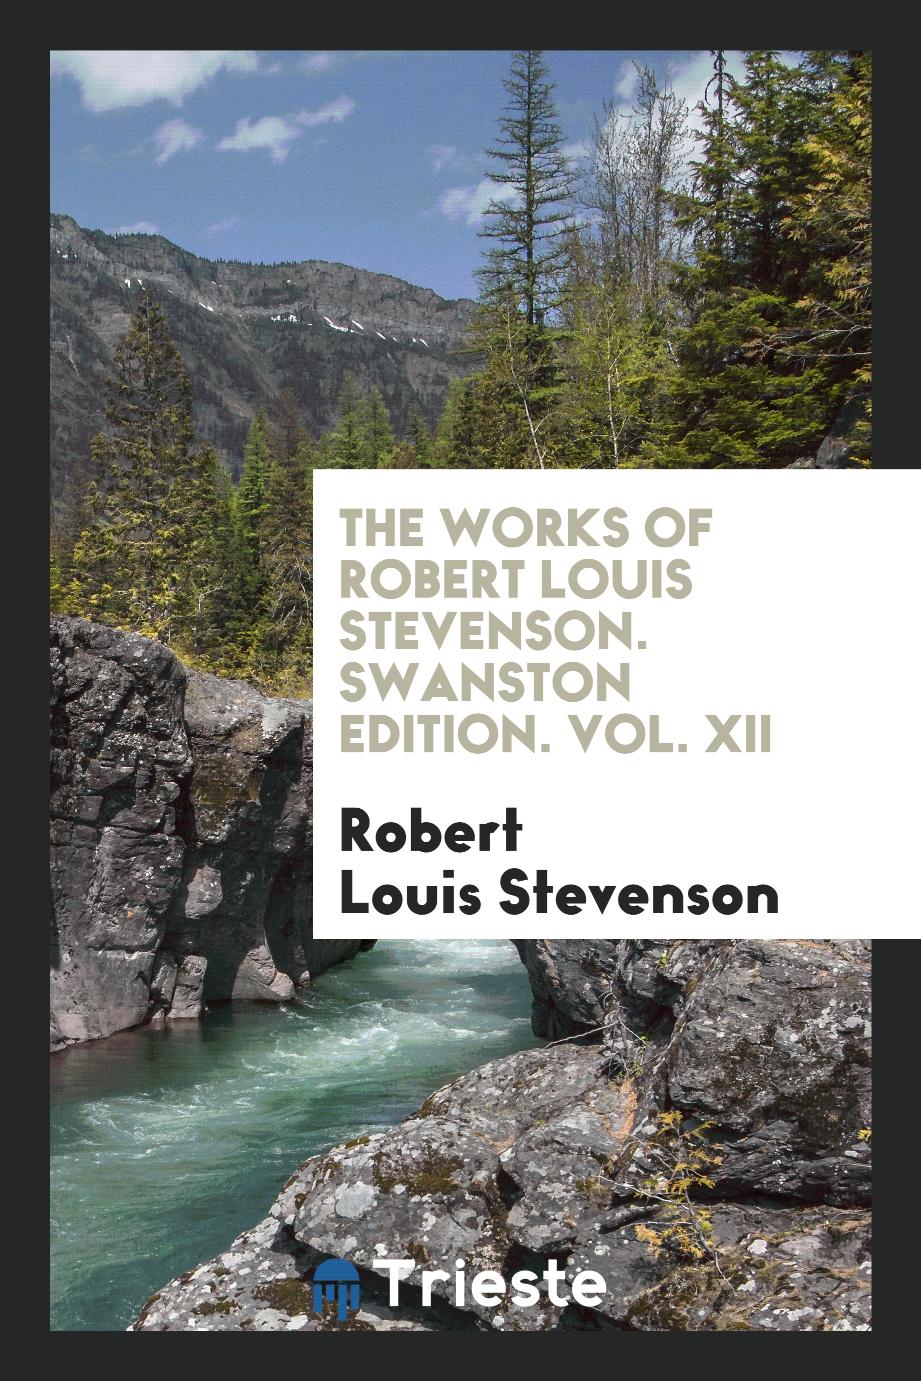 The works of Robert Louis Stevenson. Swanston edition. Vol. XII